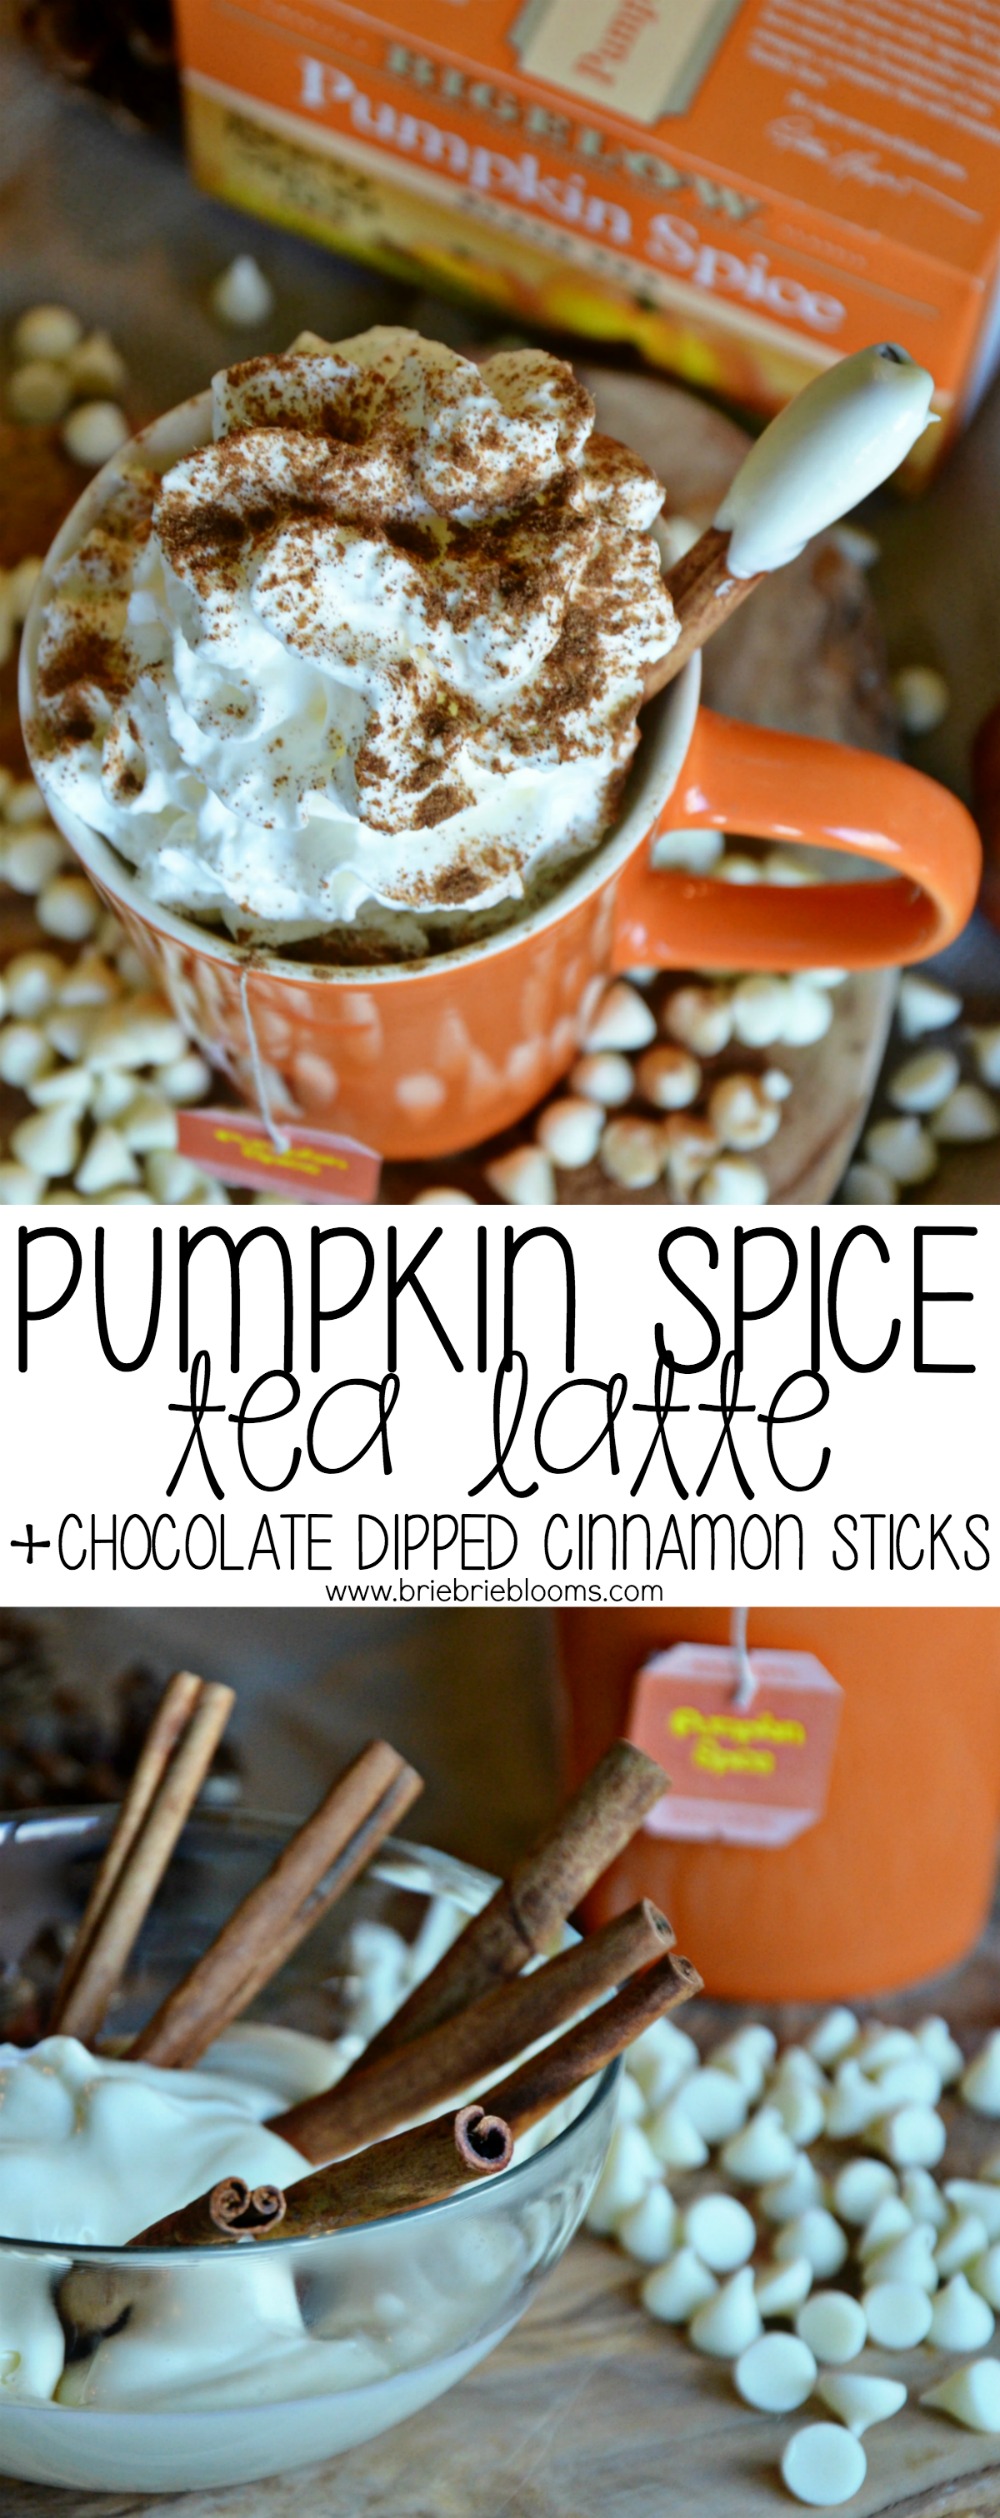 Make this easy pumpkin spice tea latte with chocolate dipped cinnamon sticks for a great fall drink.